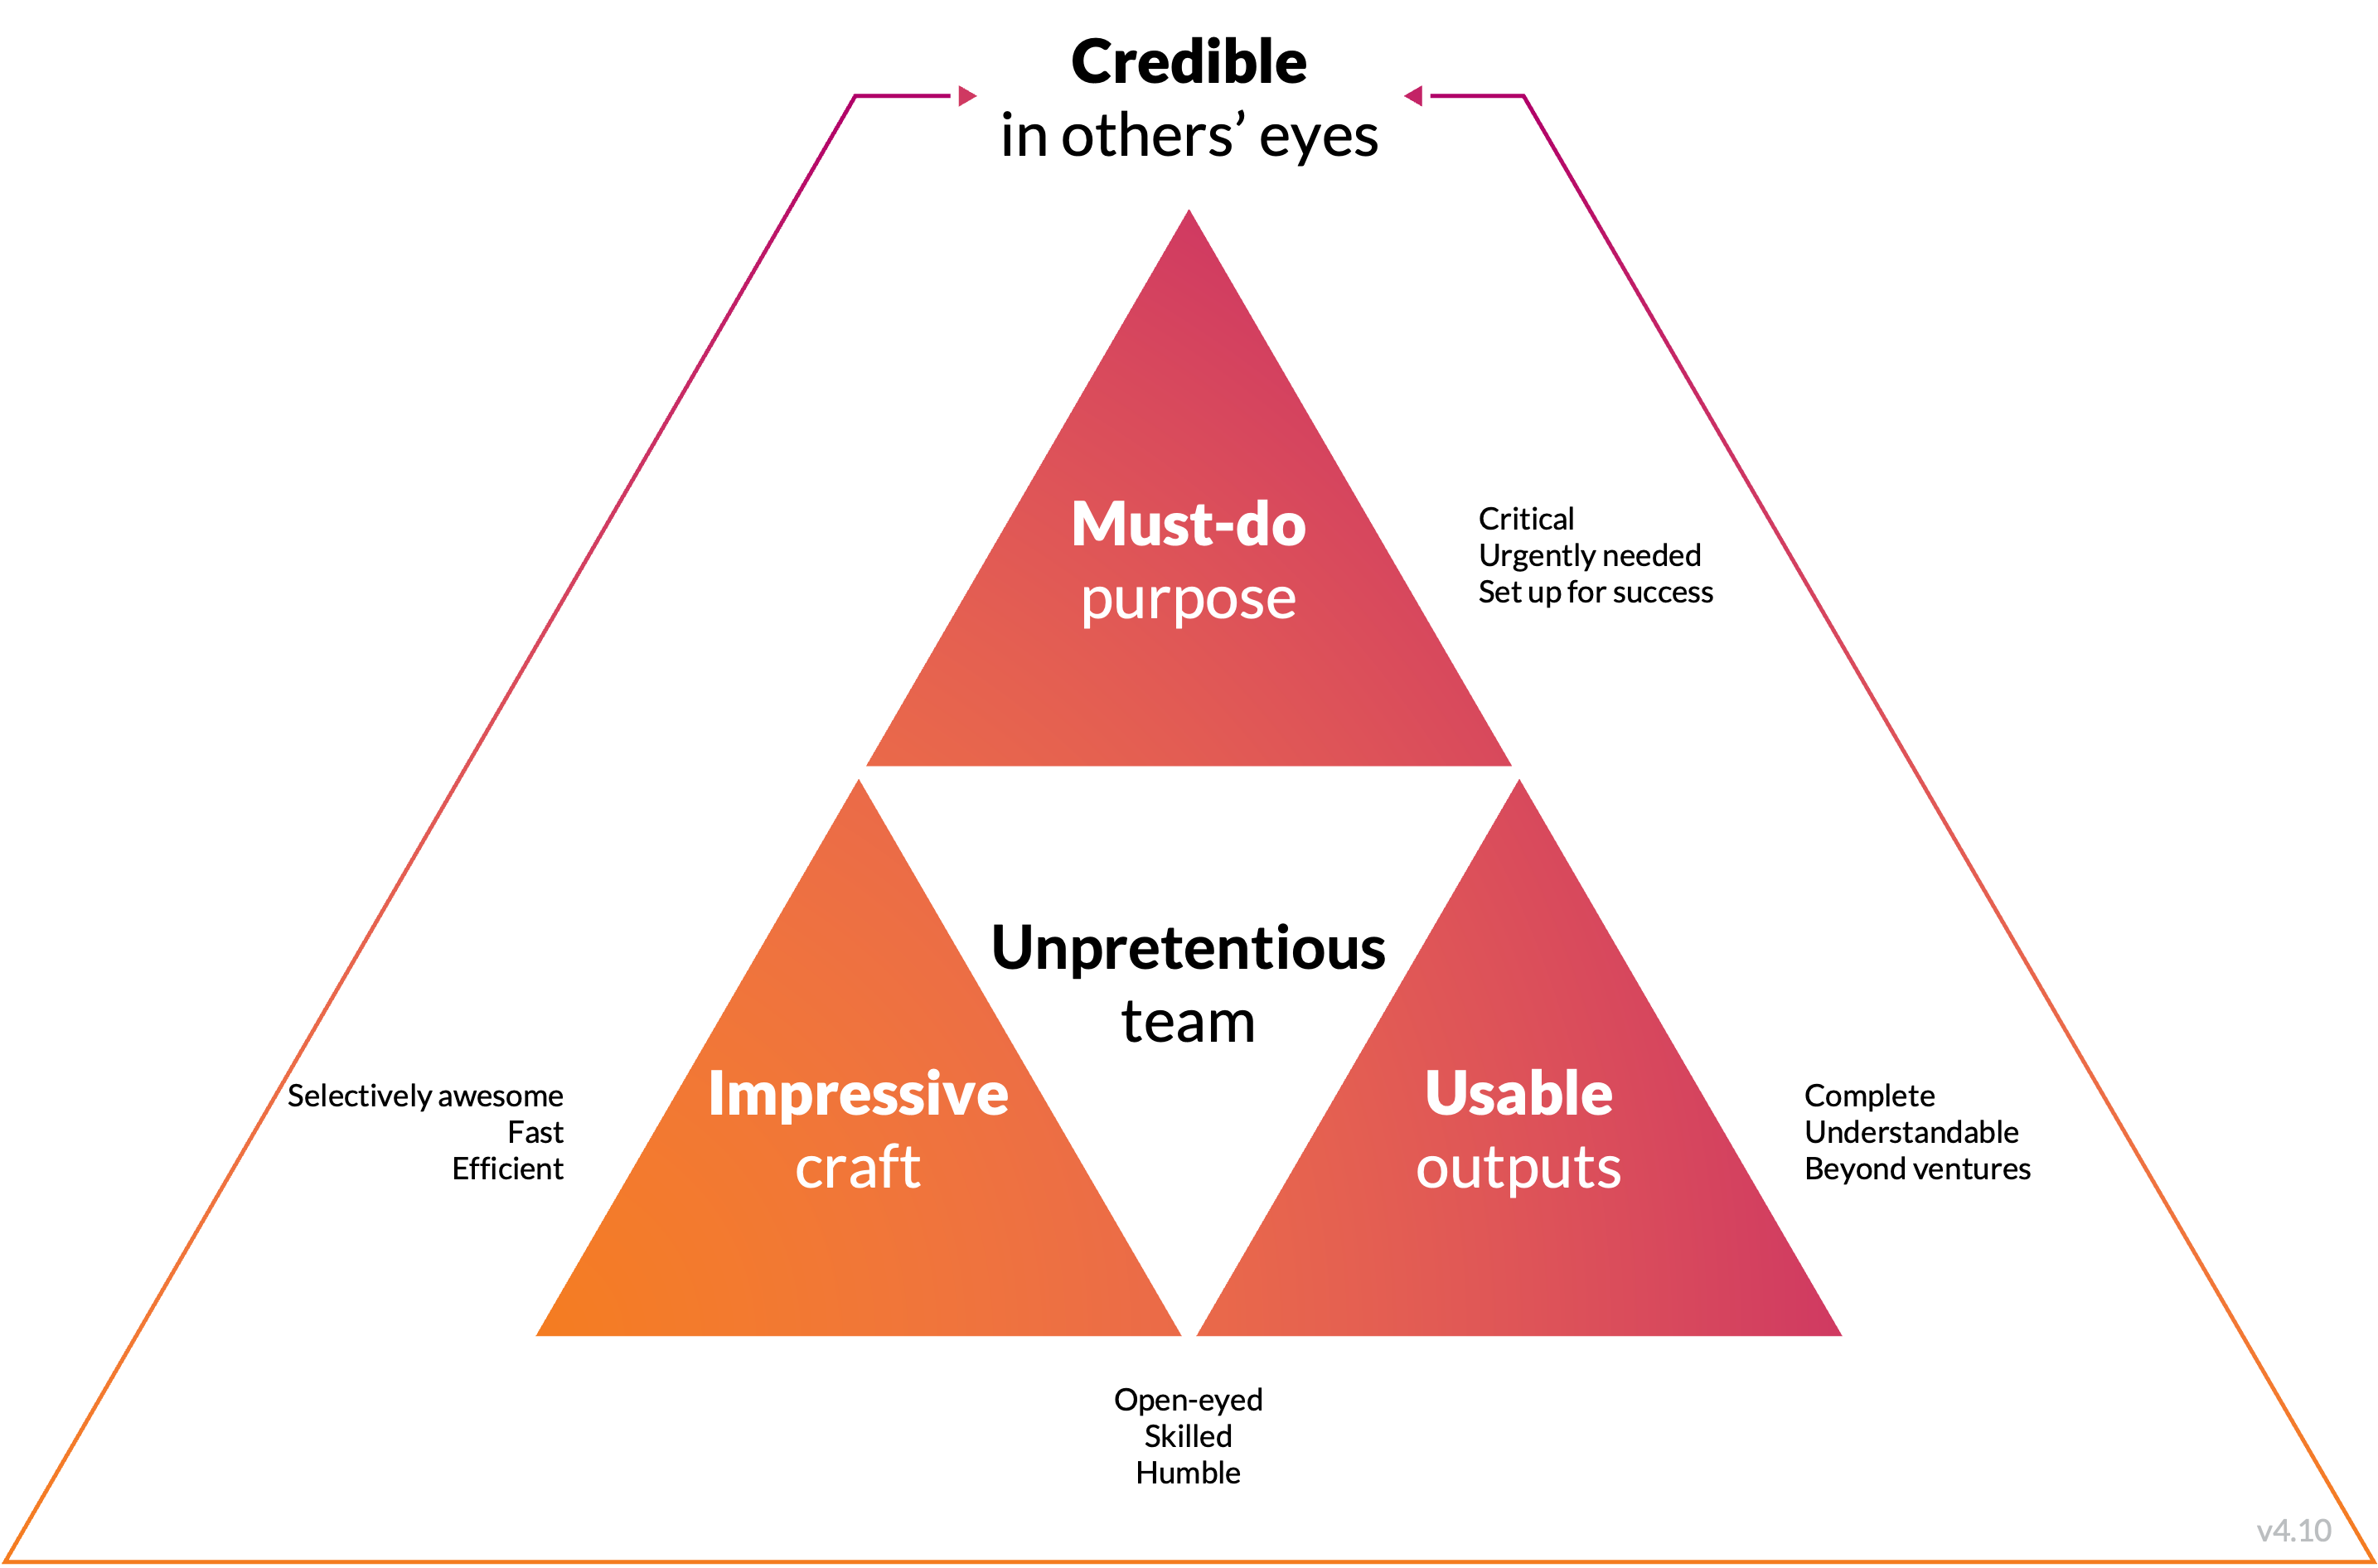 The "Credible Innovation" framework in line-art form, as described in words below